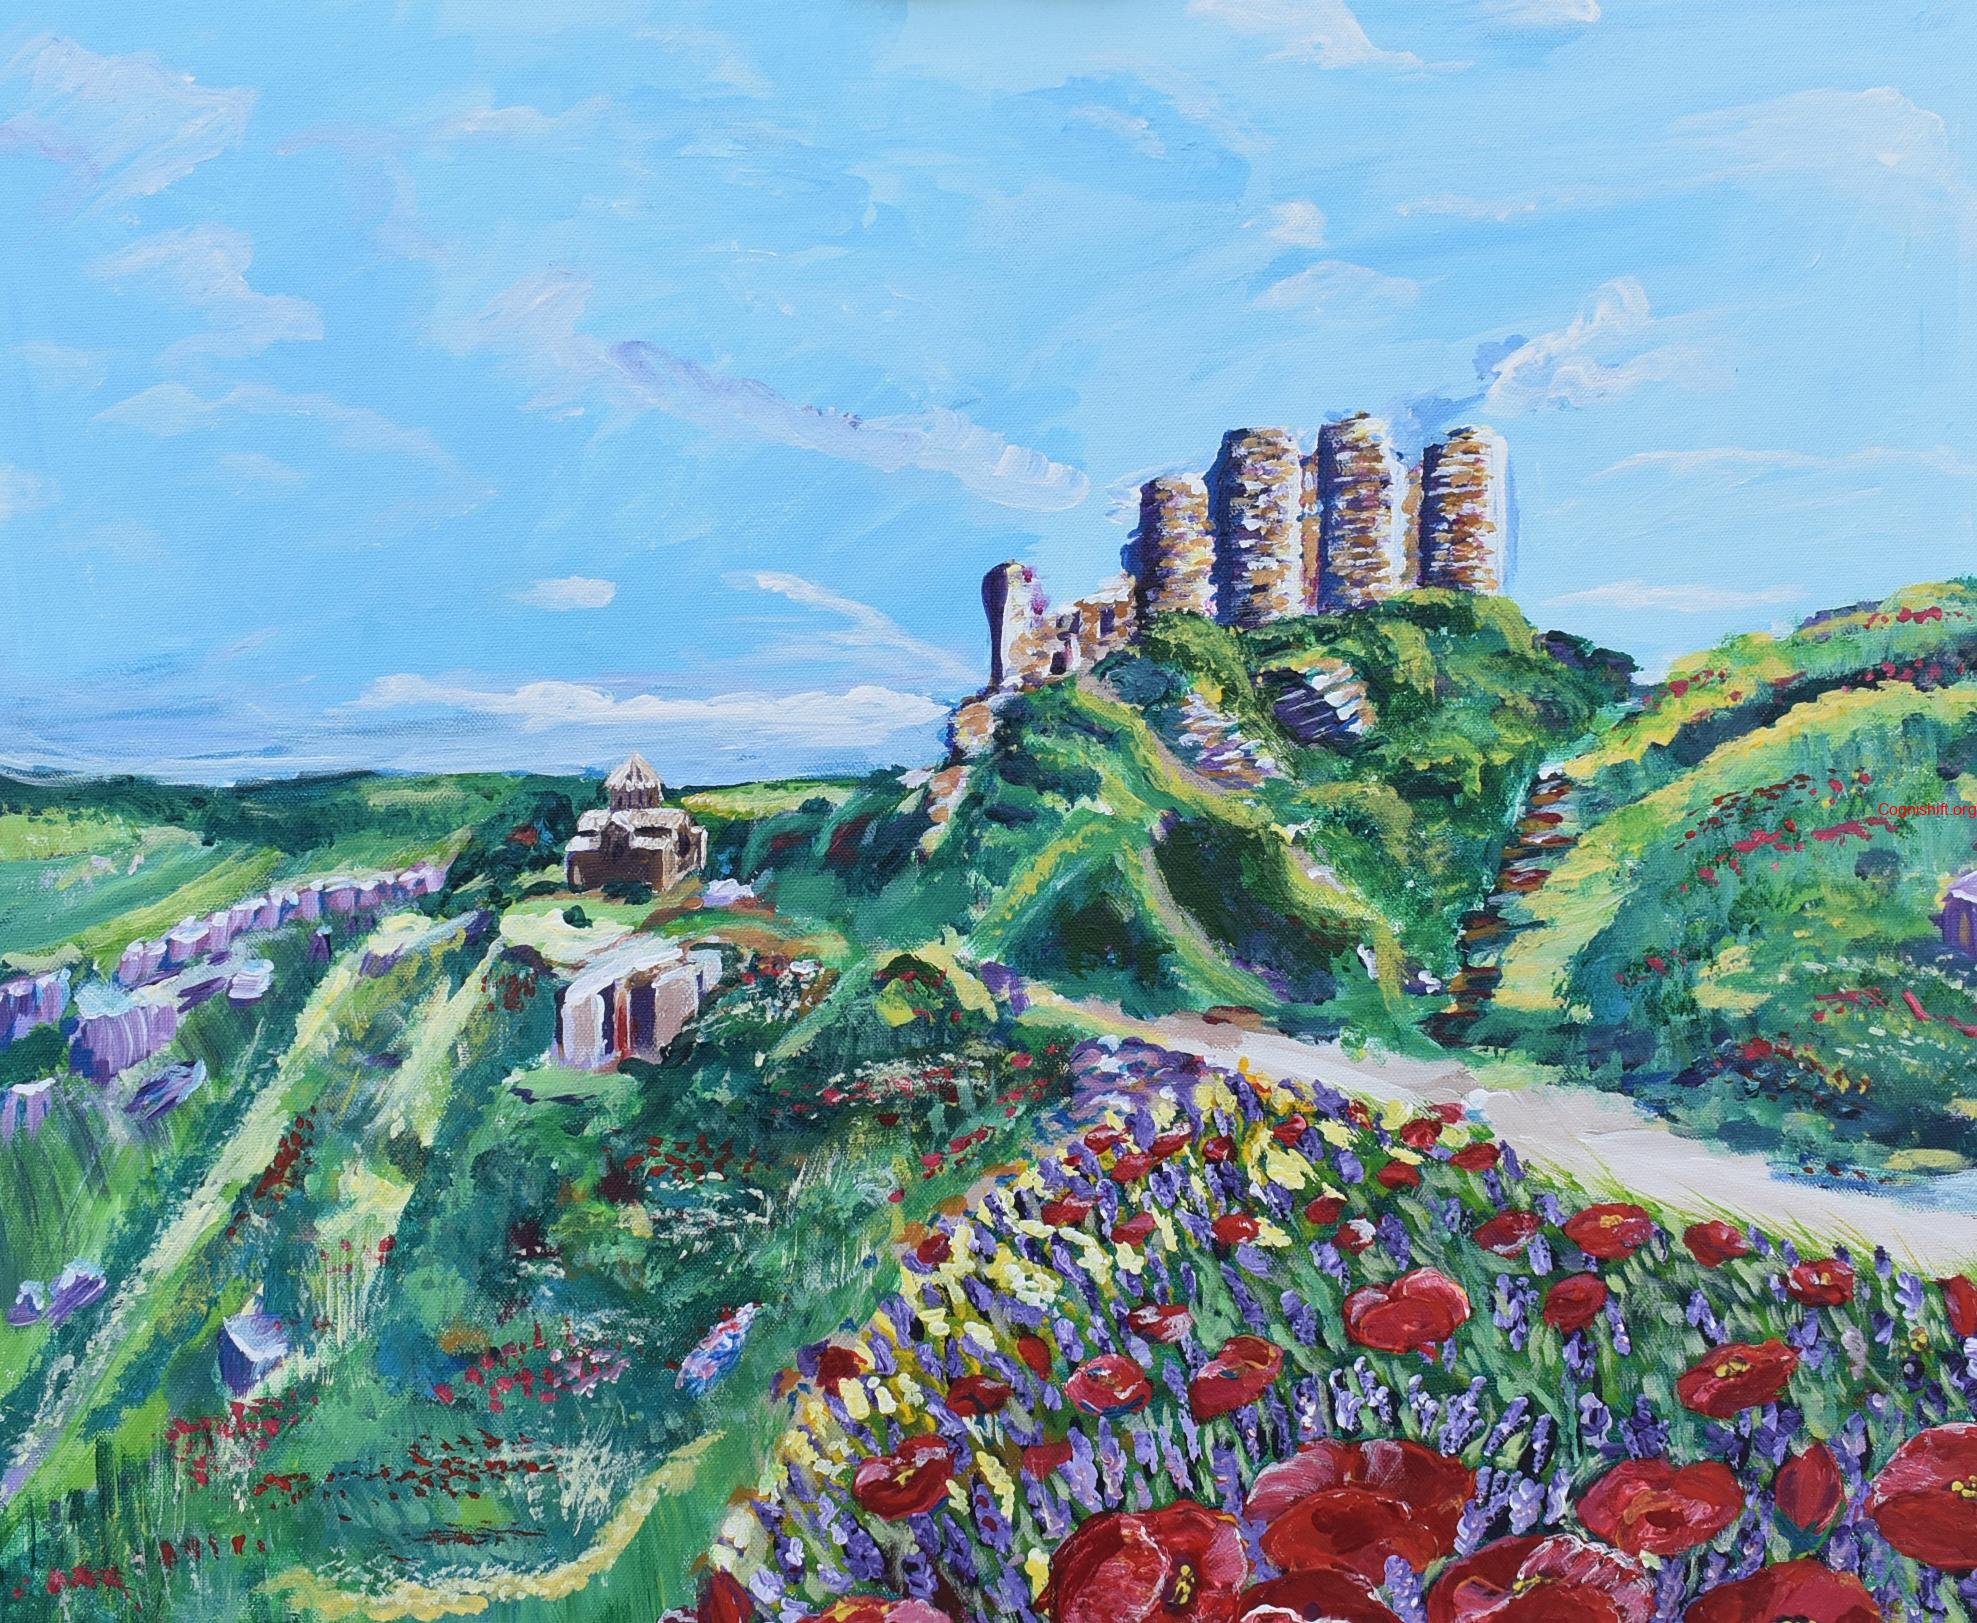 Amberd Acrylic on Canvas painting 50×60cm Original art Mari Poghosyan Amberd (Armenian: Ամբերդ) is a 10th-century fortress . The name translates to "fortress in the clouds" in Armenian.